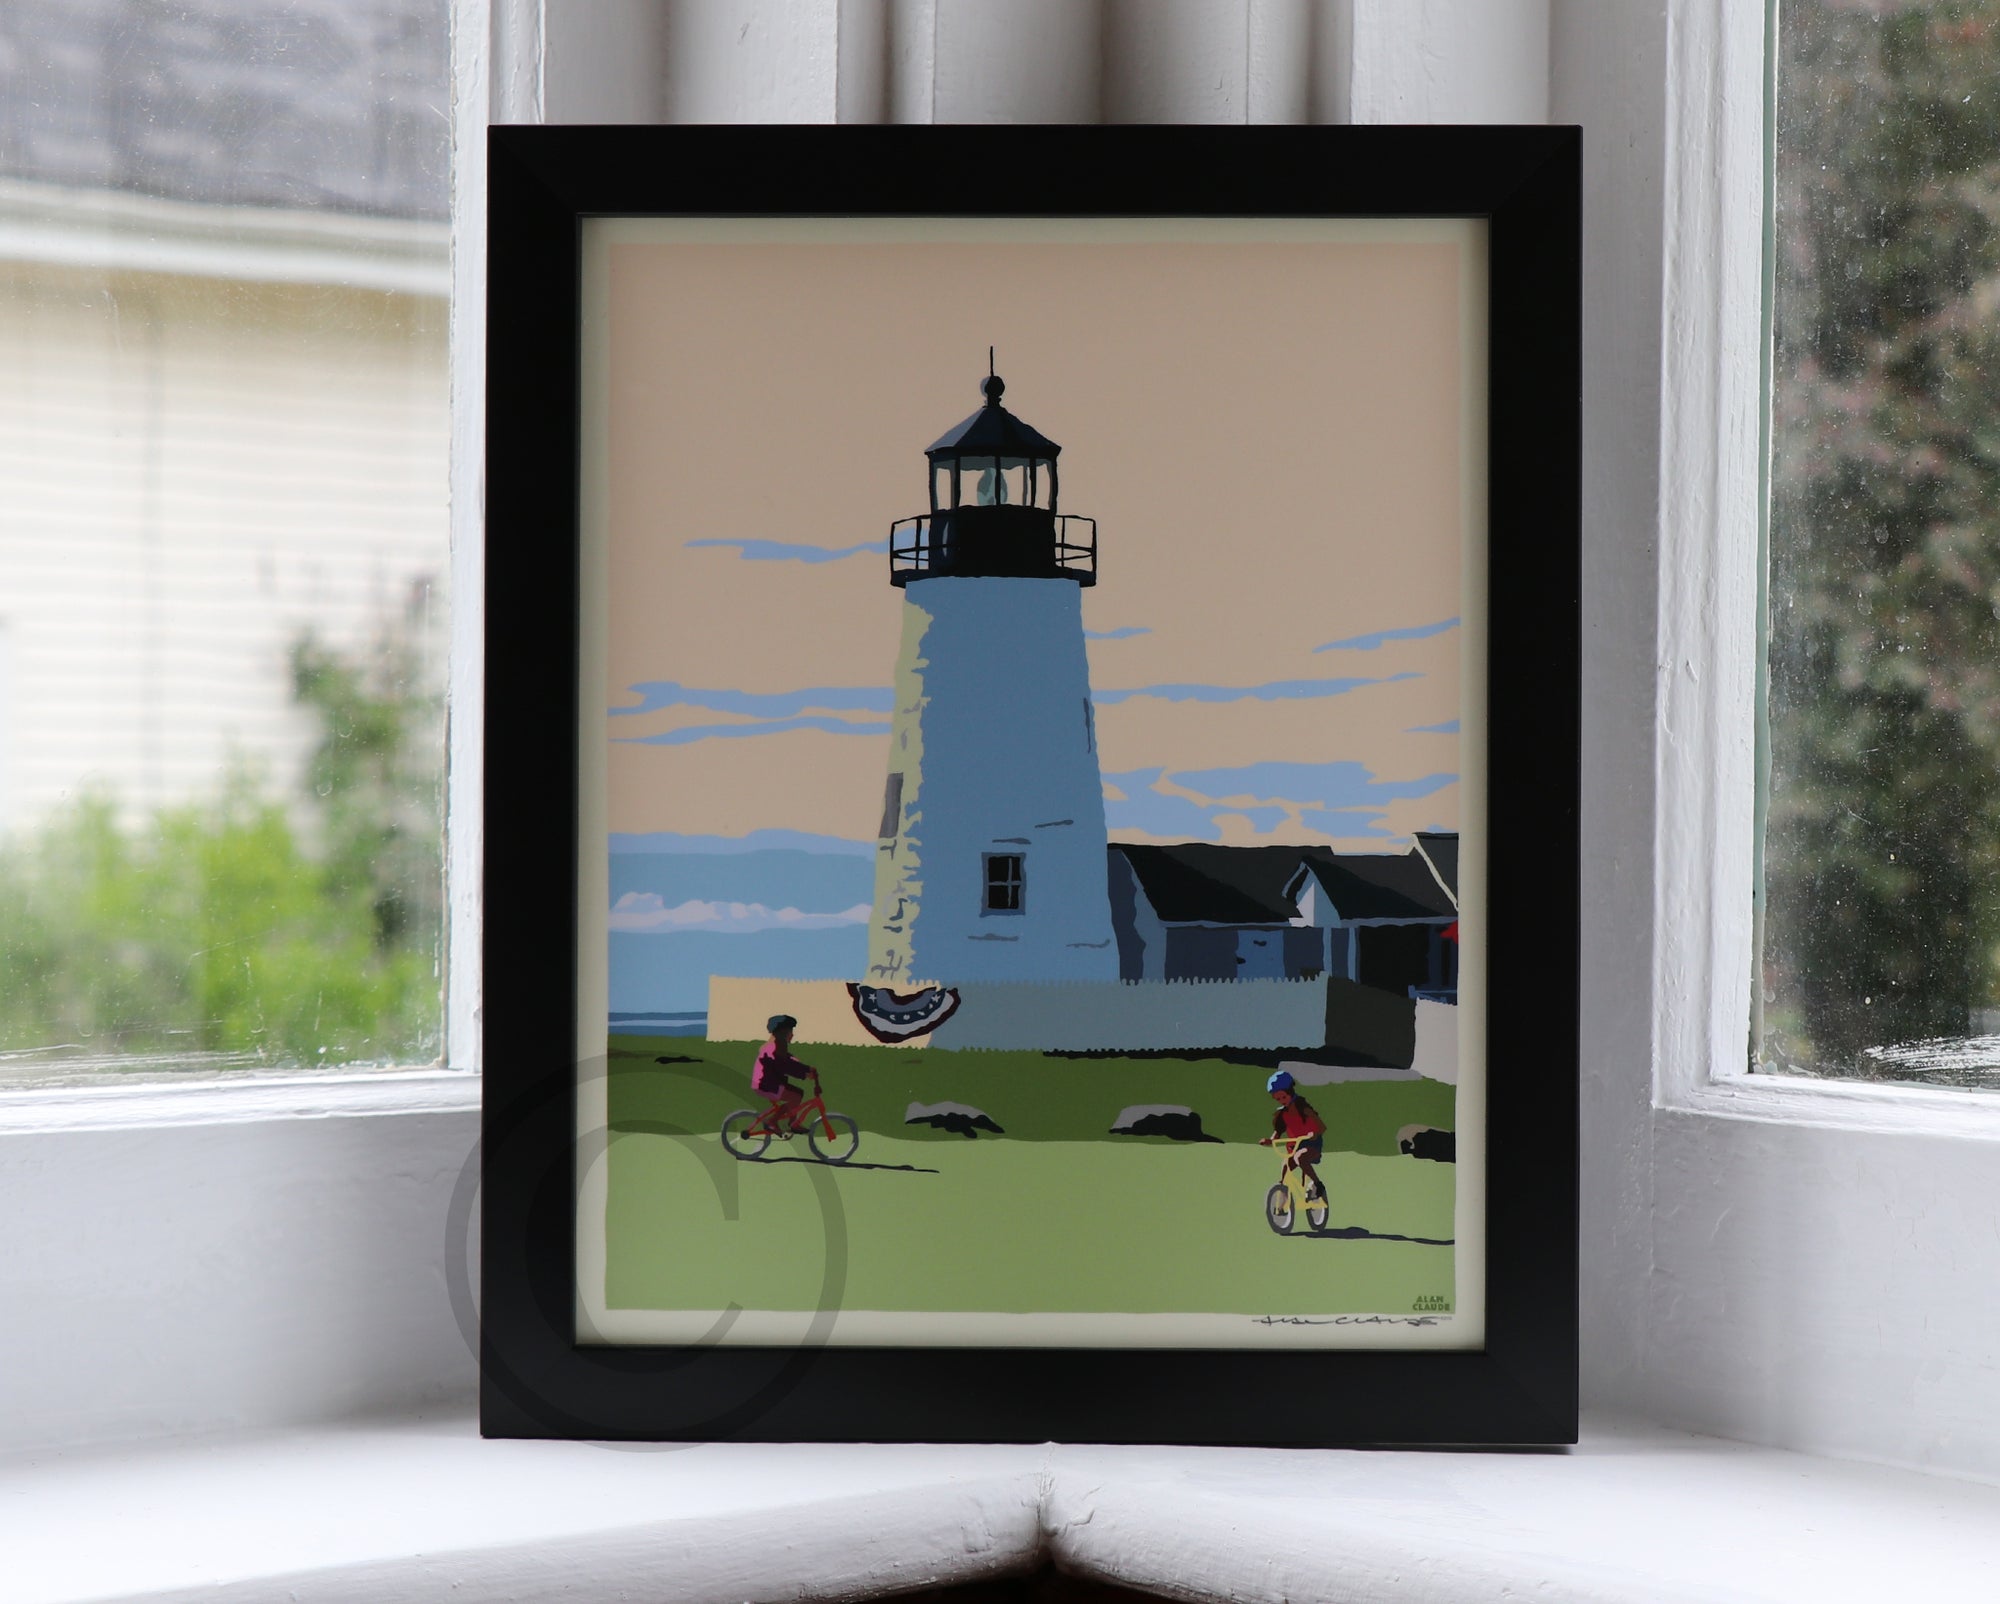 Pemaquid Bicycle Girls Art Print 8" x 10" Framed Poster By Alan Claude - Maine